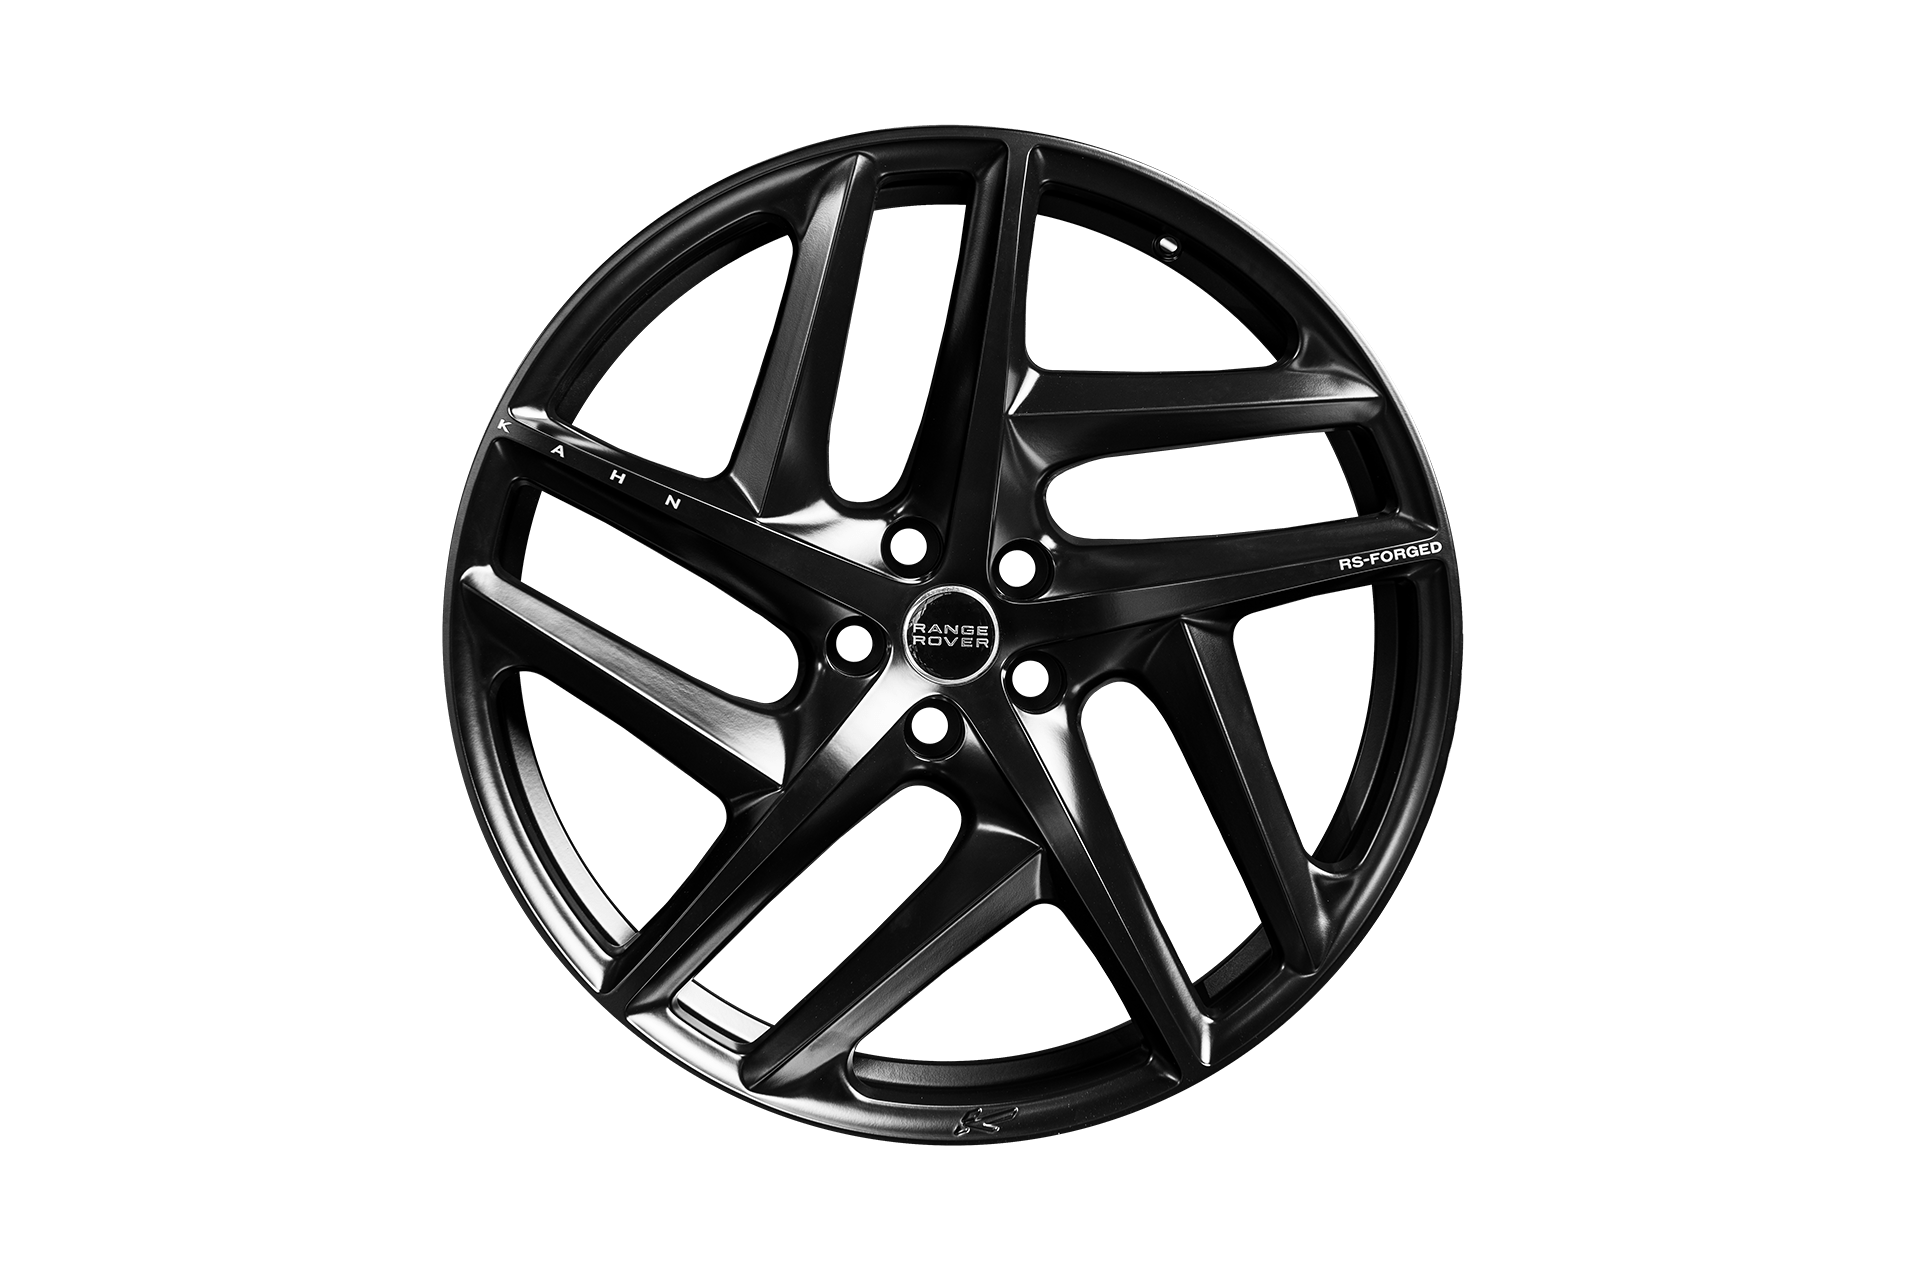 Range Rover (2018-PRESENT) Type 52 RS-Forged Alloy Wheels - Project Kahn